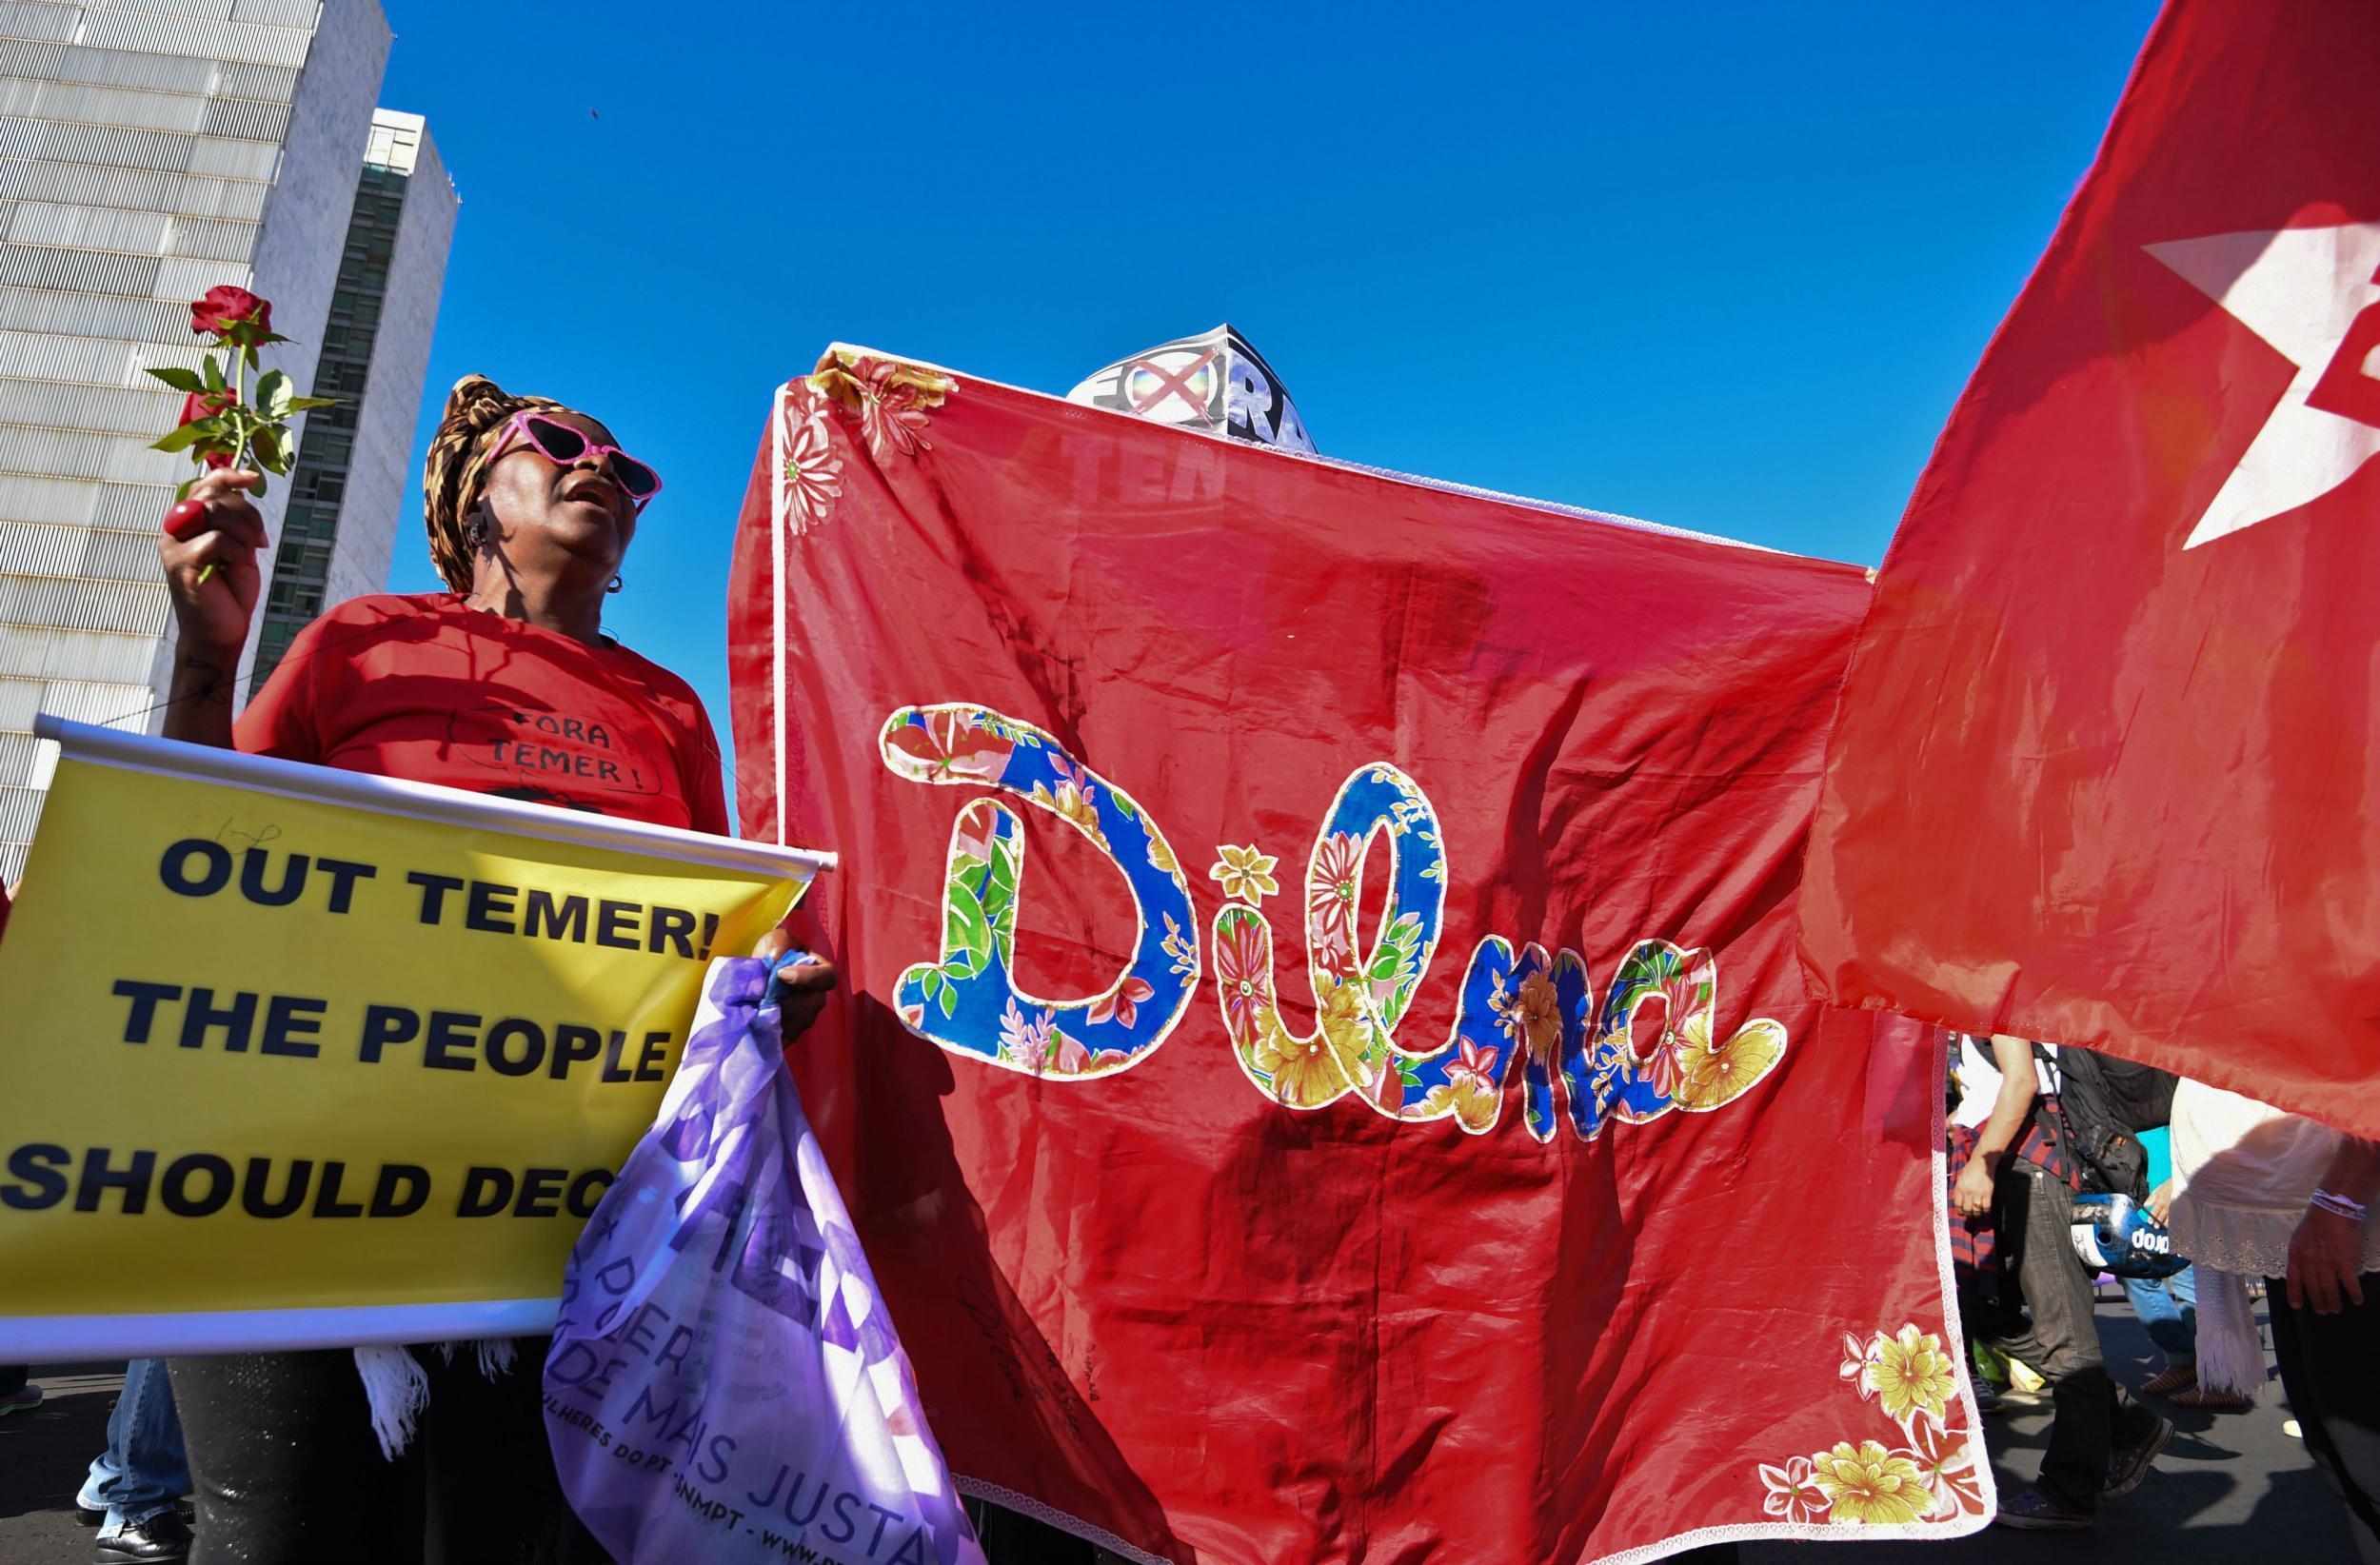 Protestors gather in Brasilia in support of Dilma Rousseff